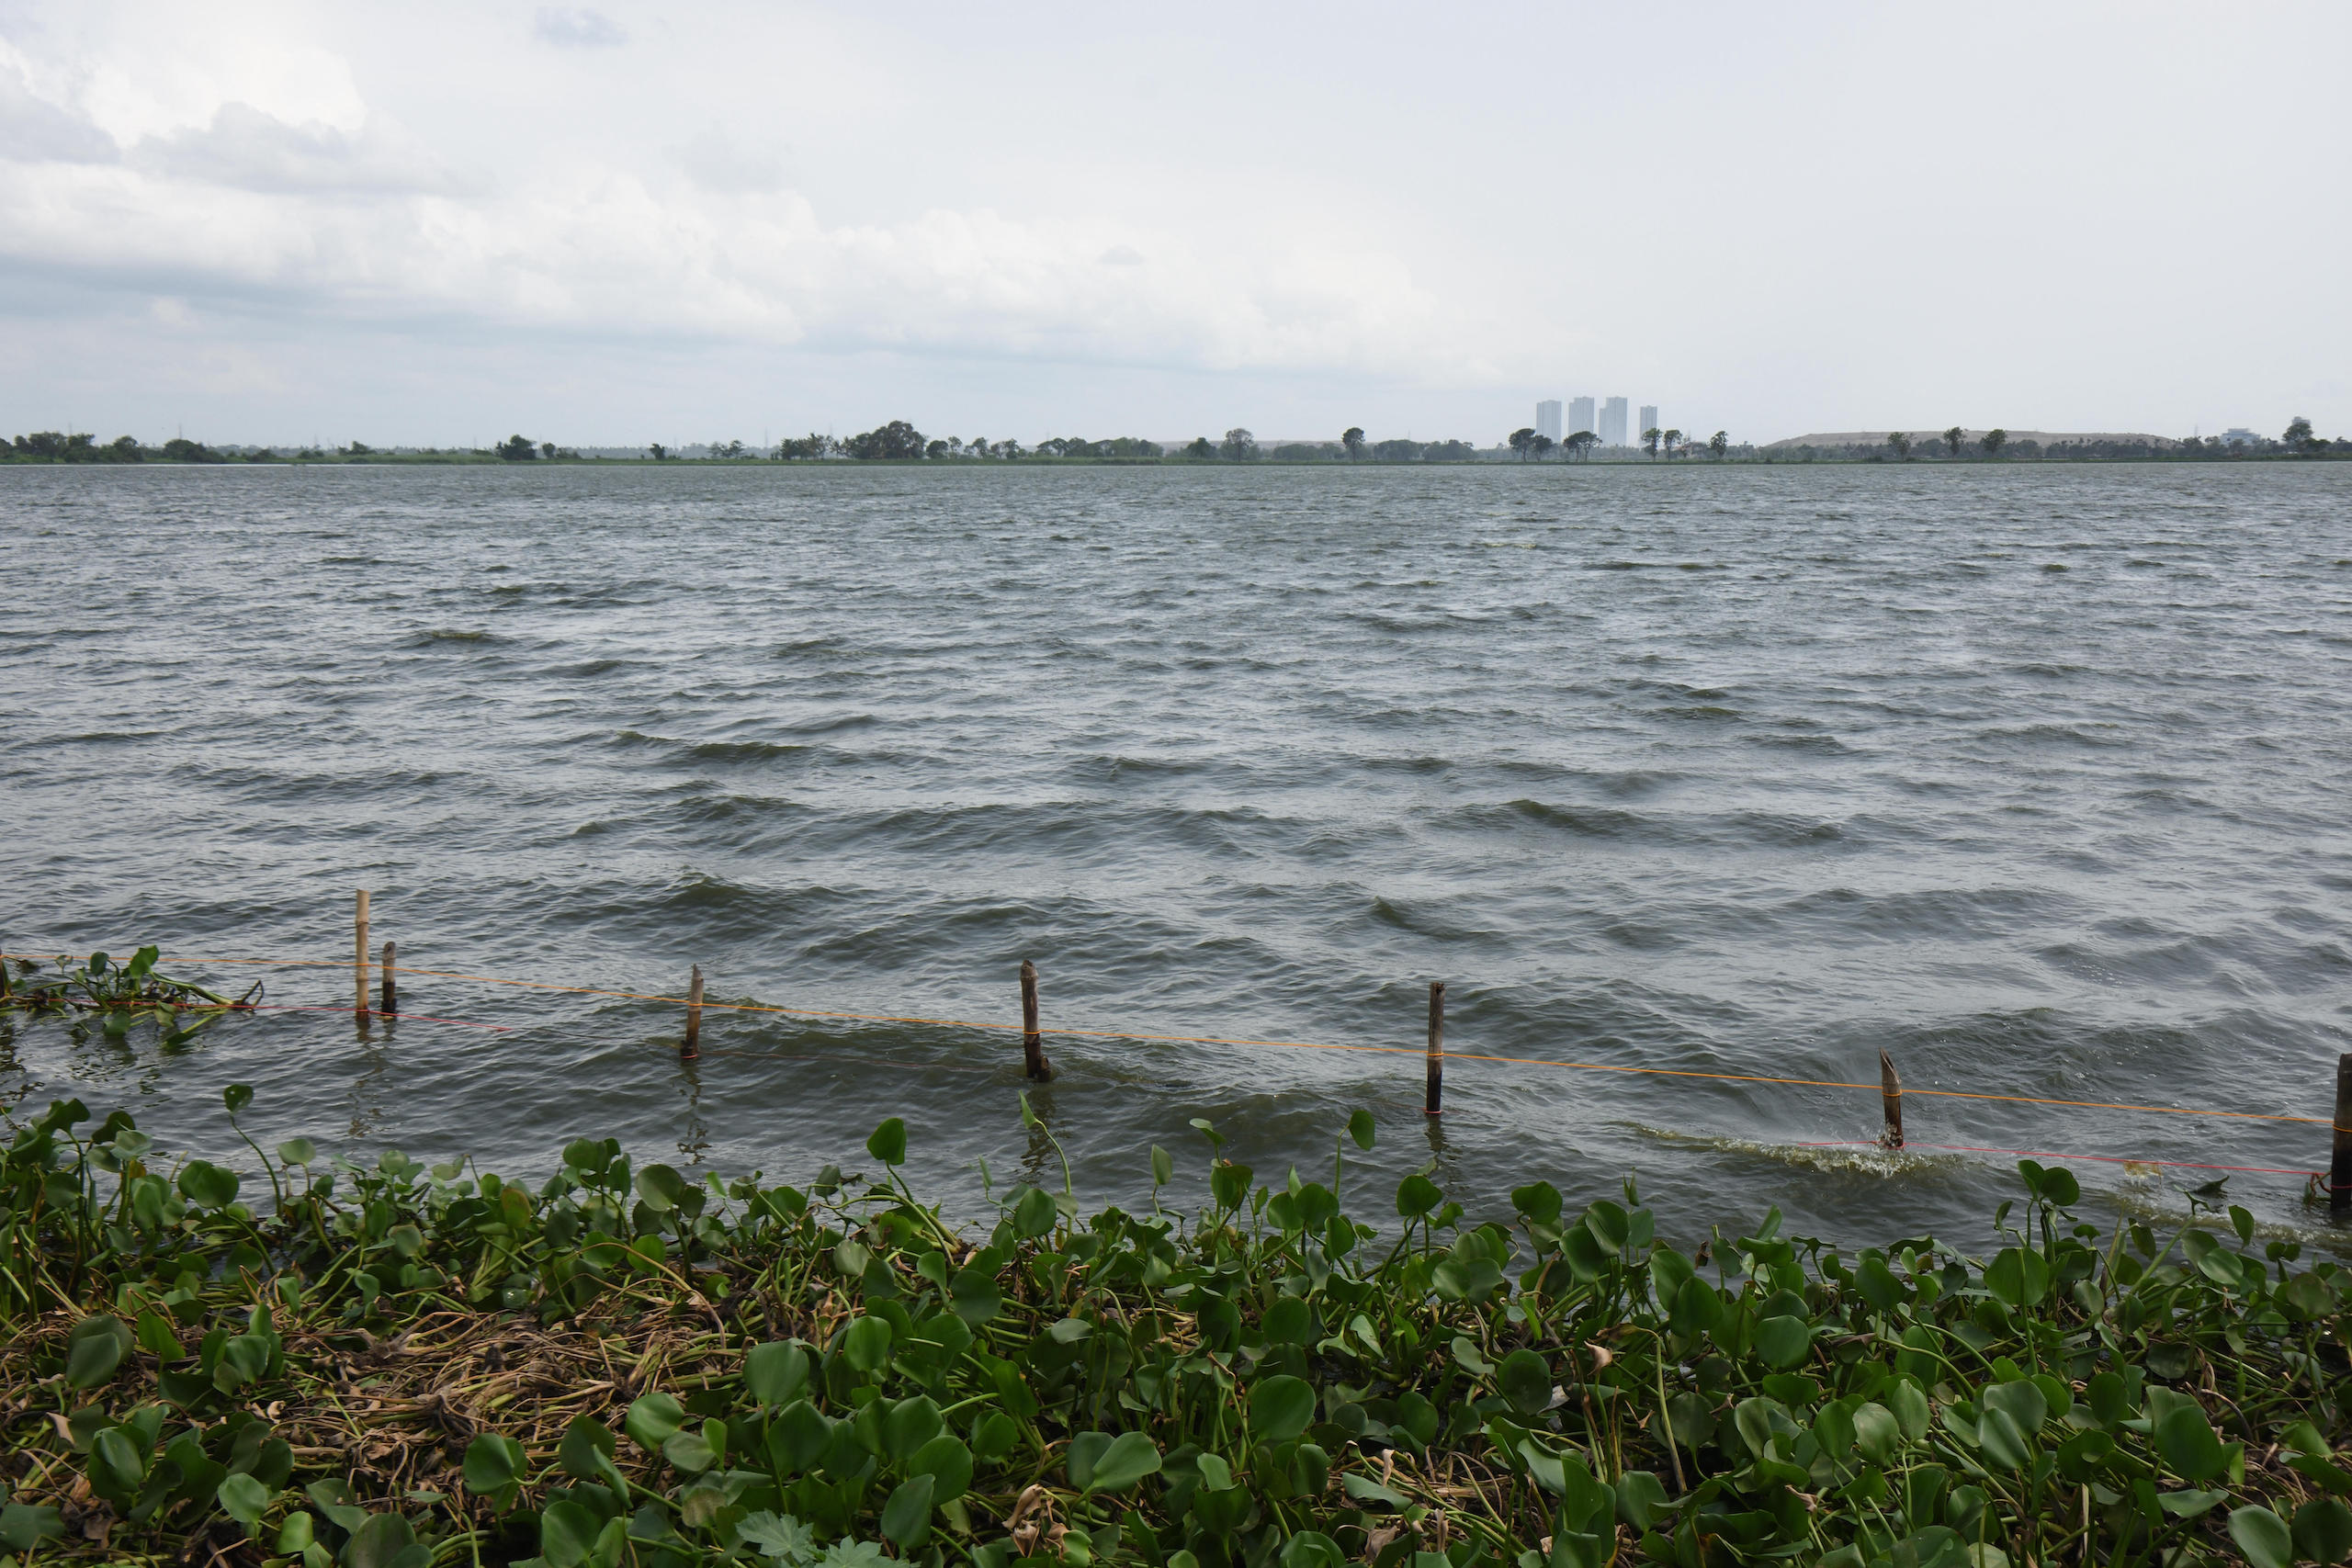 The wetlands of eastern Kolkata, India, are being used as a natural filtration system for the city’s waste